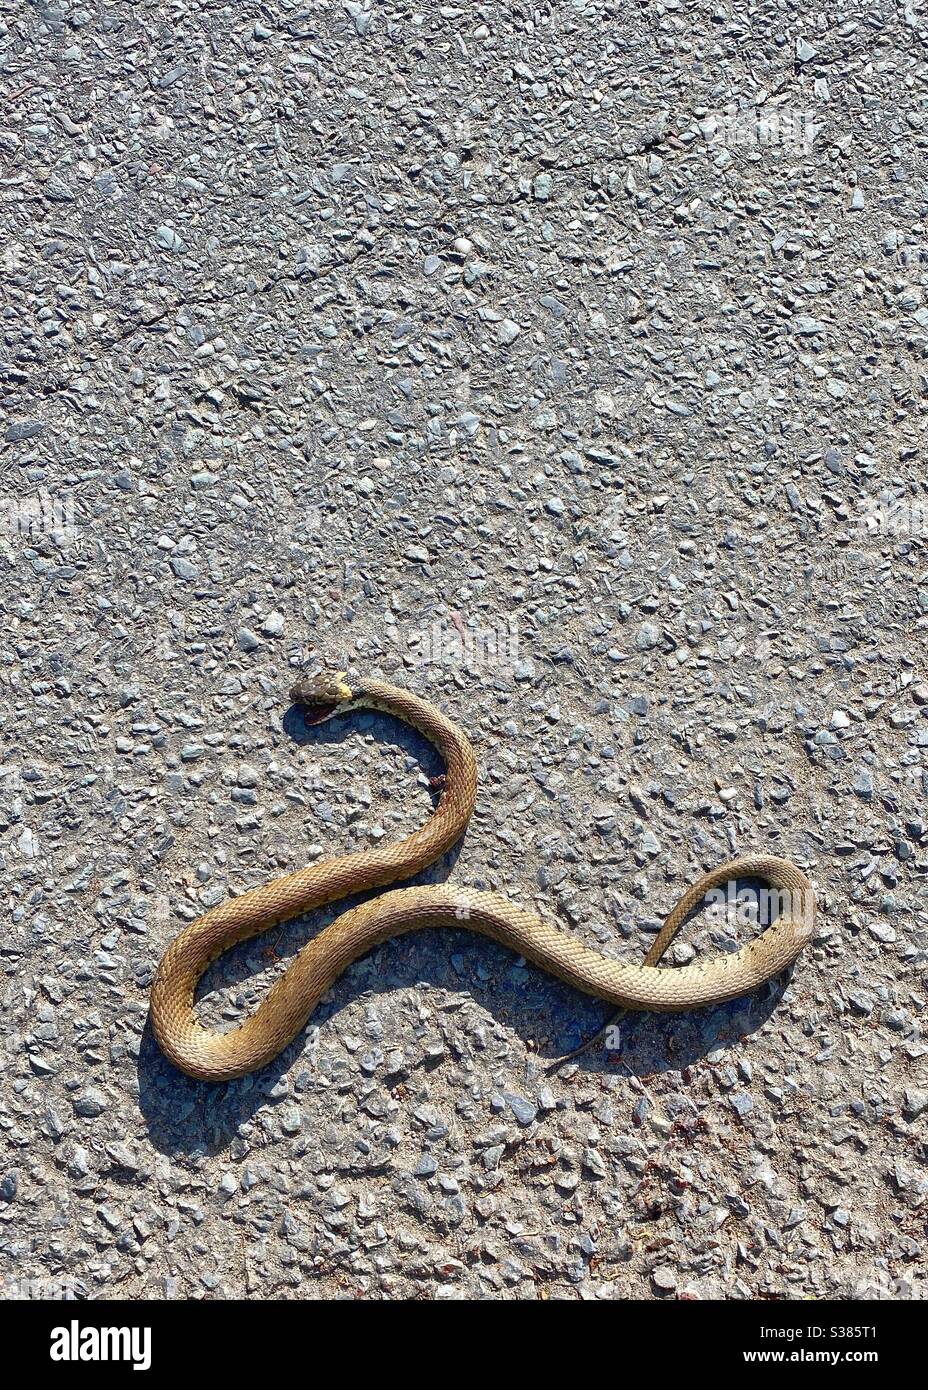 Dead grass snake on a road. No people. Copy space. Stock Photo